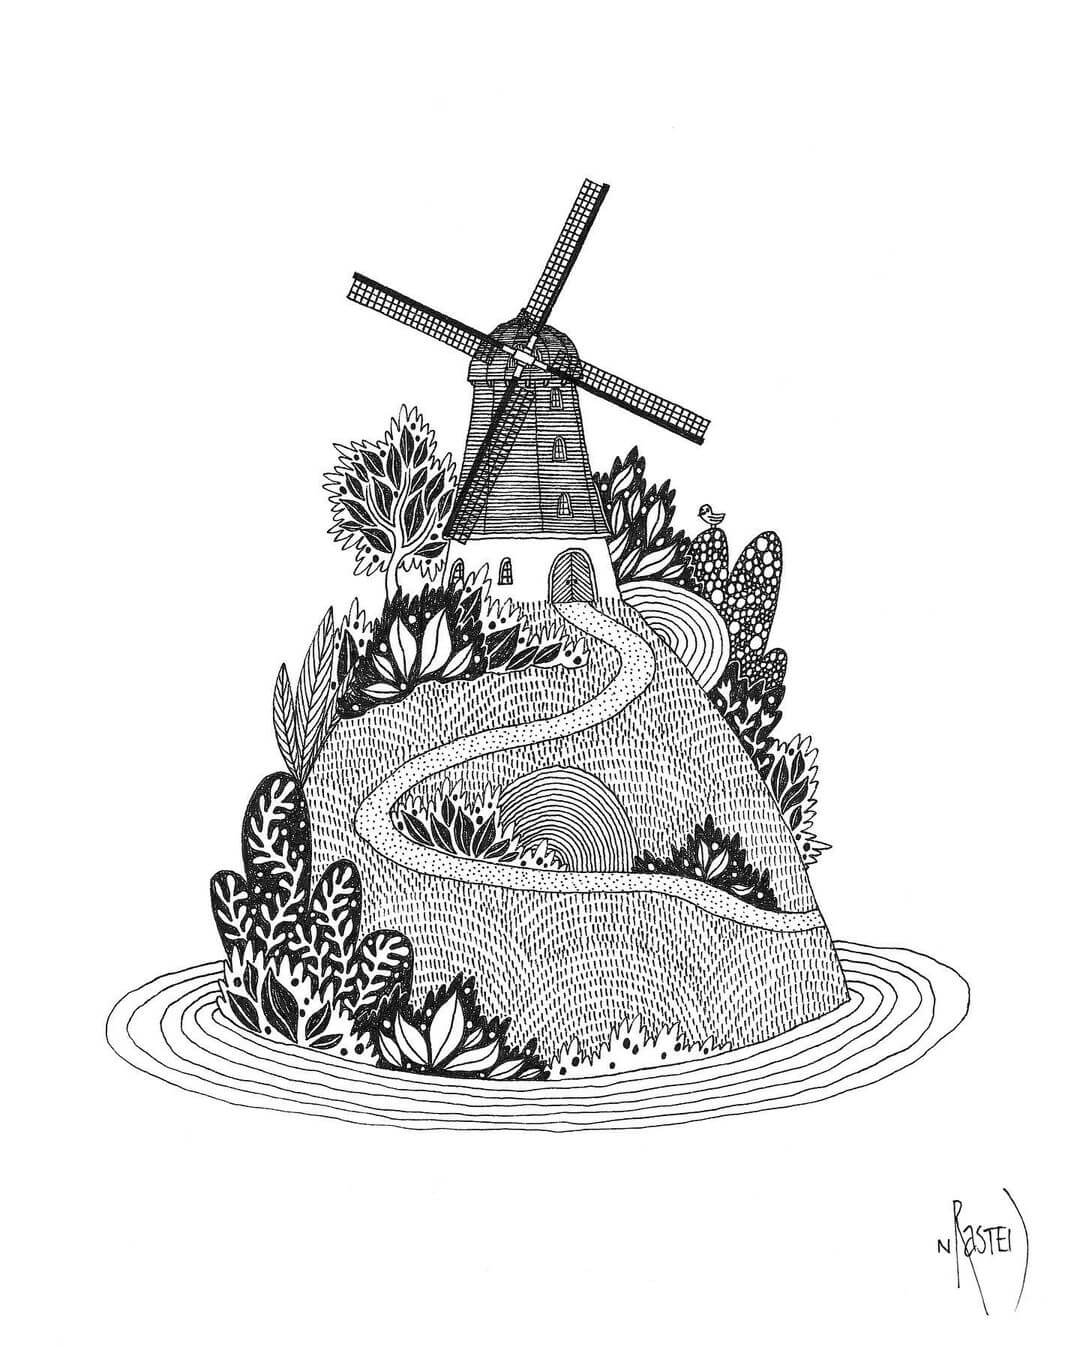 Scandinavian style drawing of a windmill on a hill with patterns drawn in pen and ink.